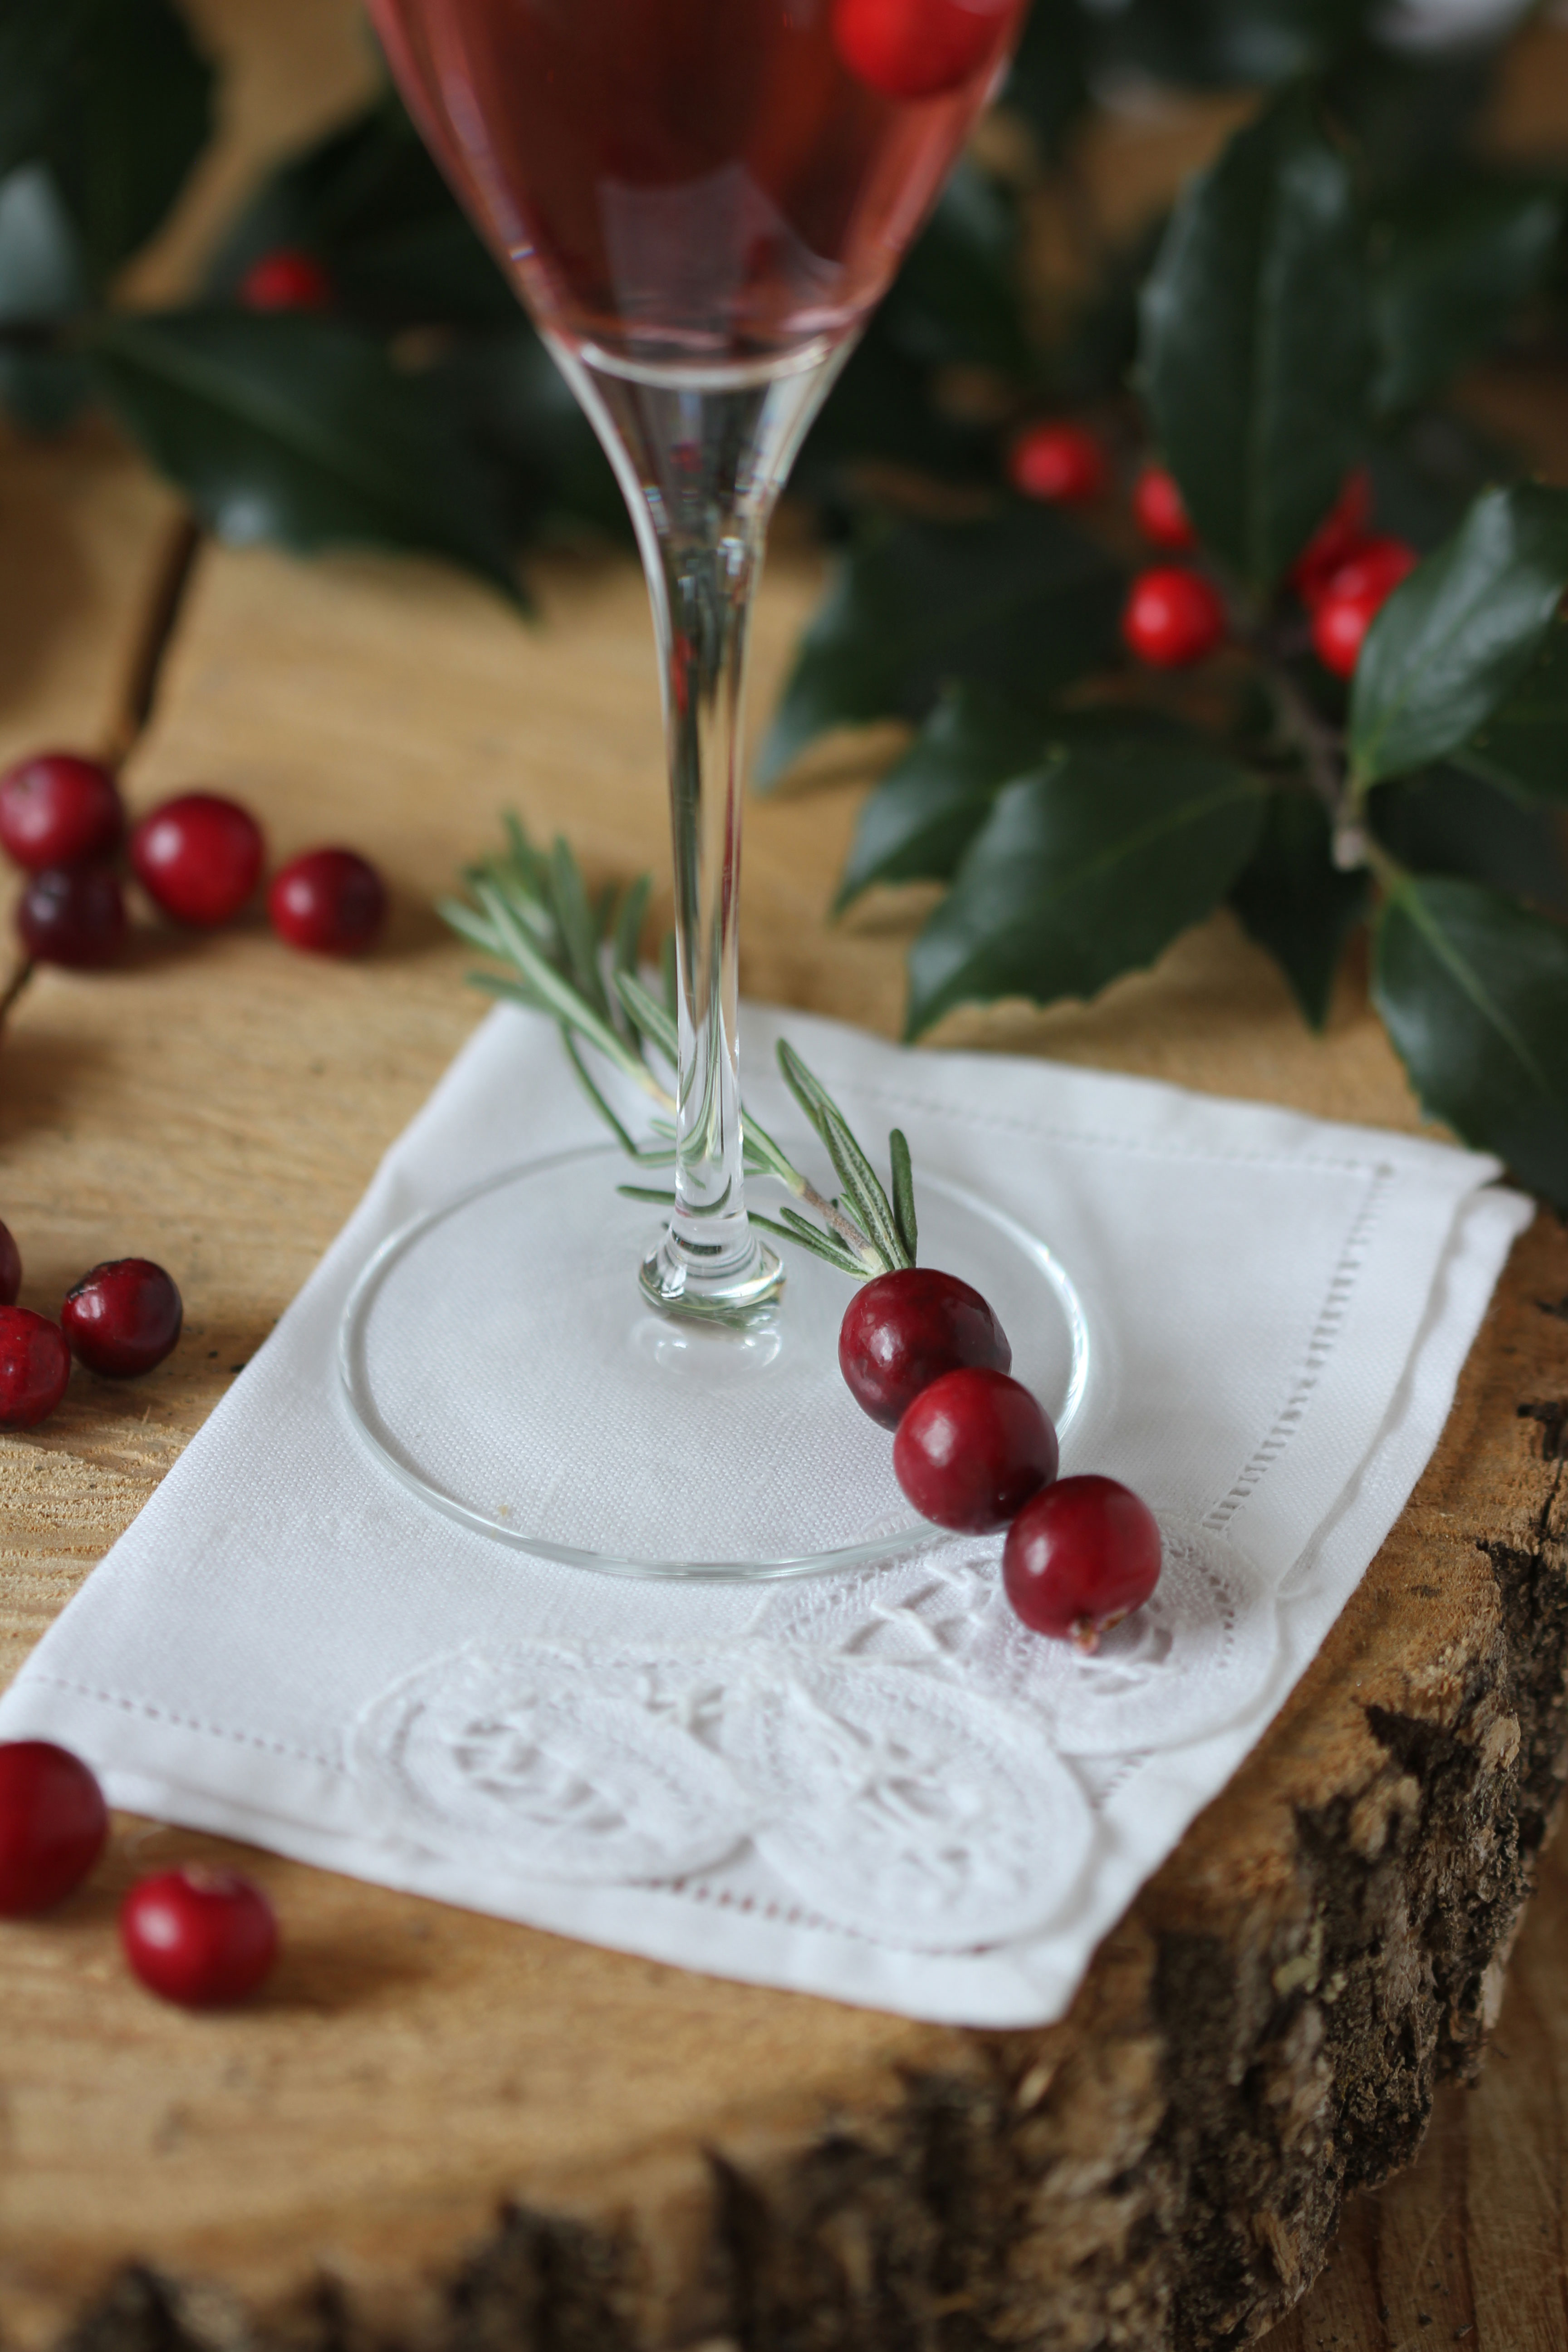 Celebrate the season with this festive and delicious Cranberry Rosemary Champagne Cocktail that will WOW your guests!